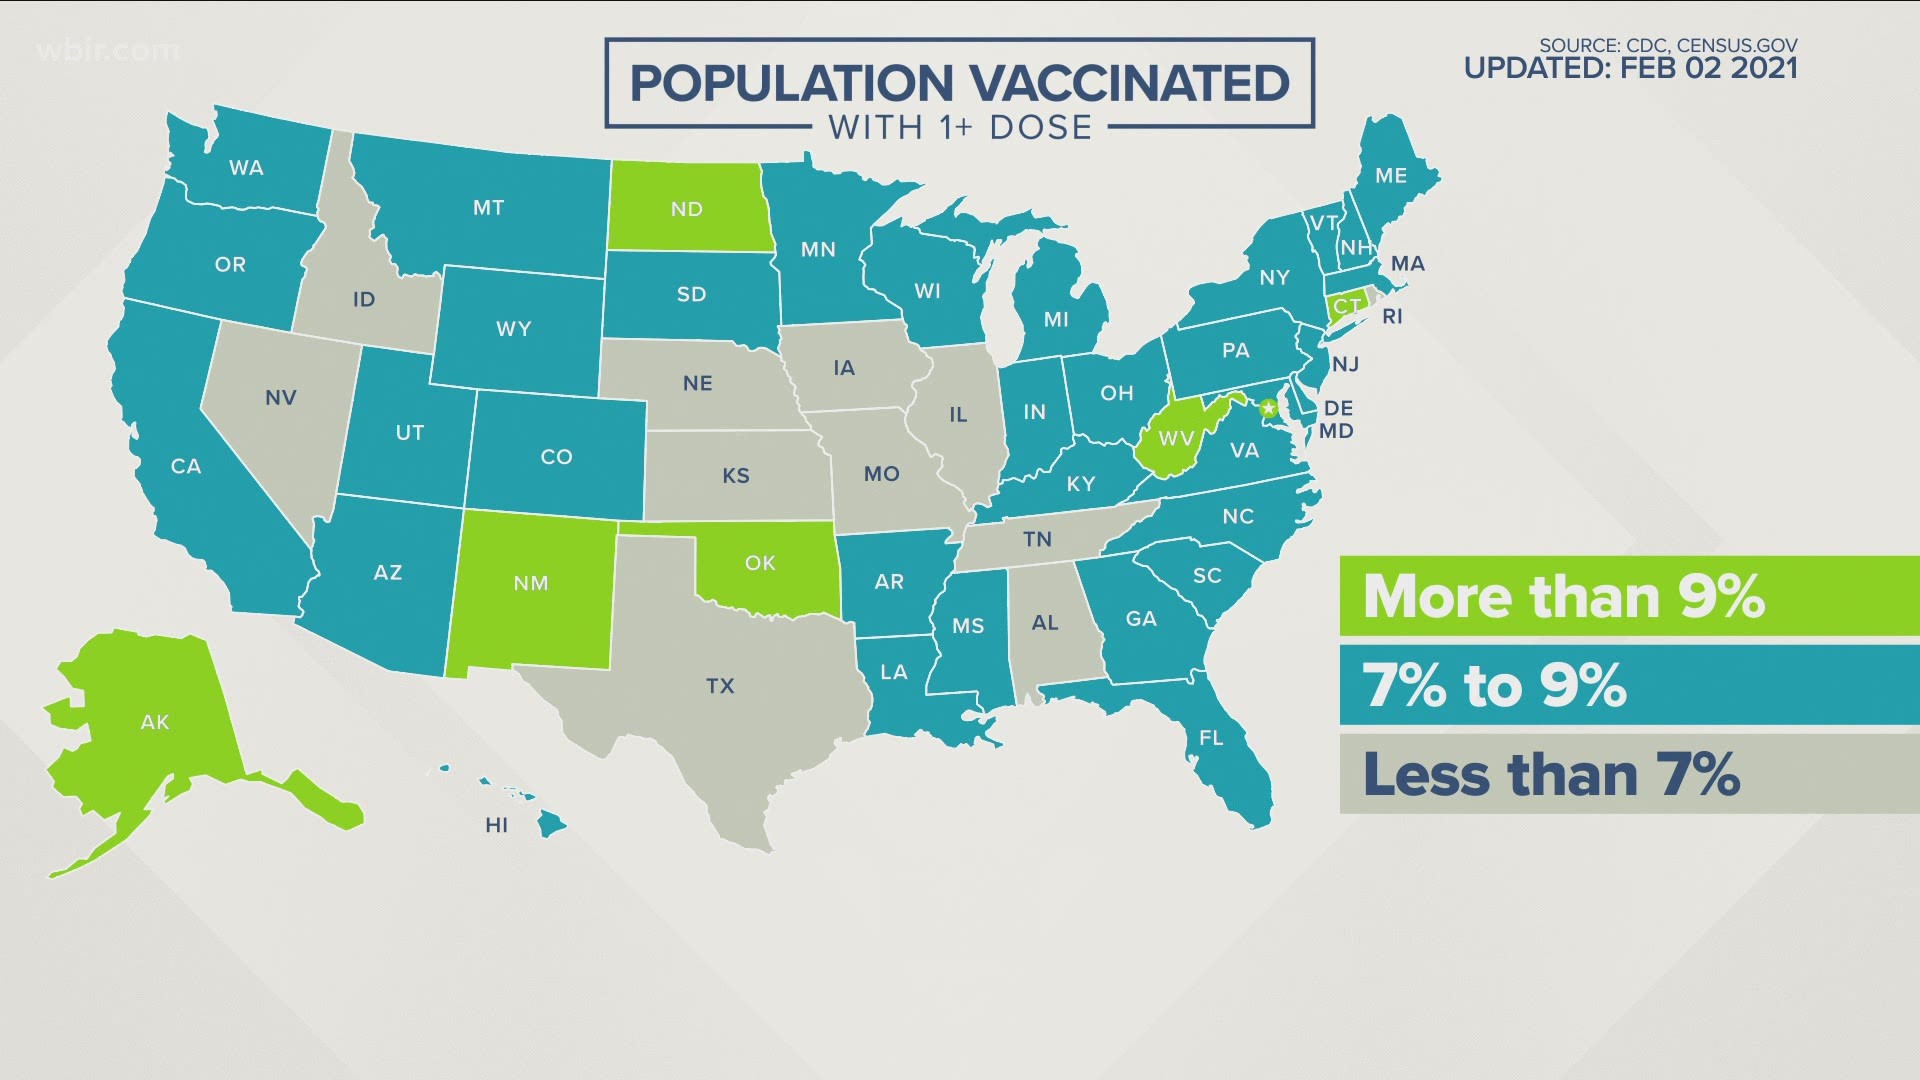 Officials said that the state falls behind most of the country when it comes to COVID-19 vaccine distribution.